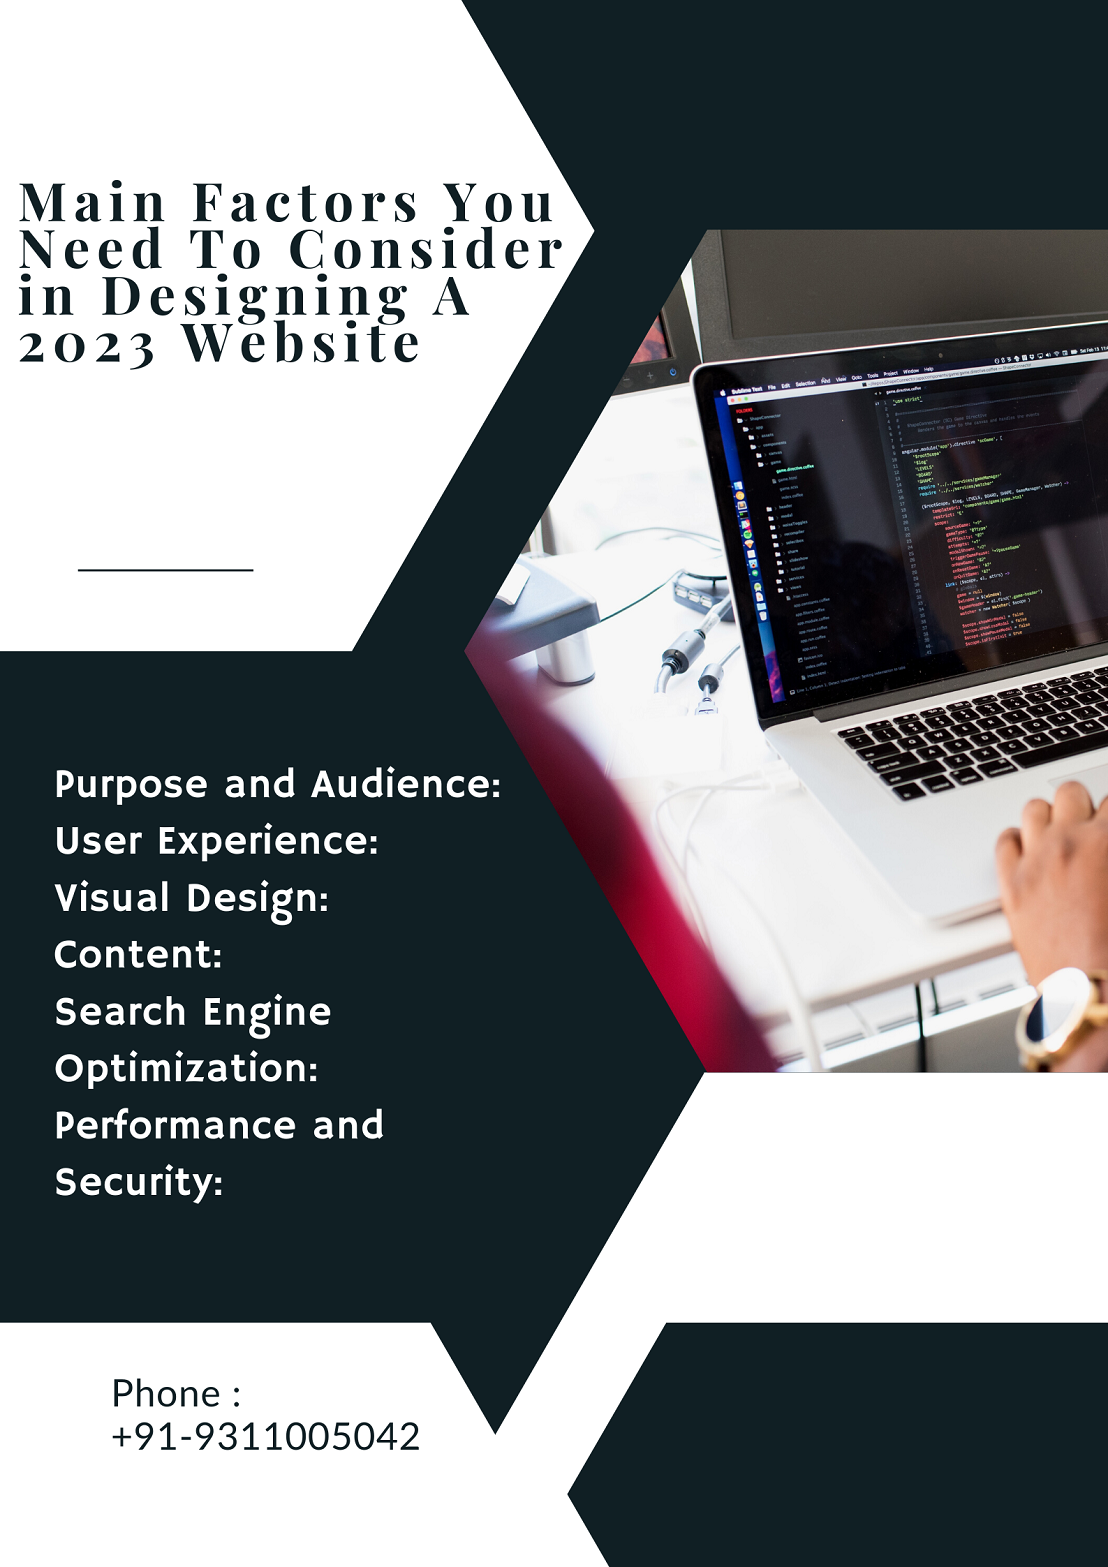 6 Main Factors You Need To Consider in Designing A 2023 Website